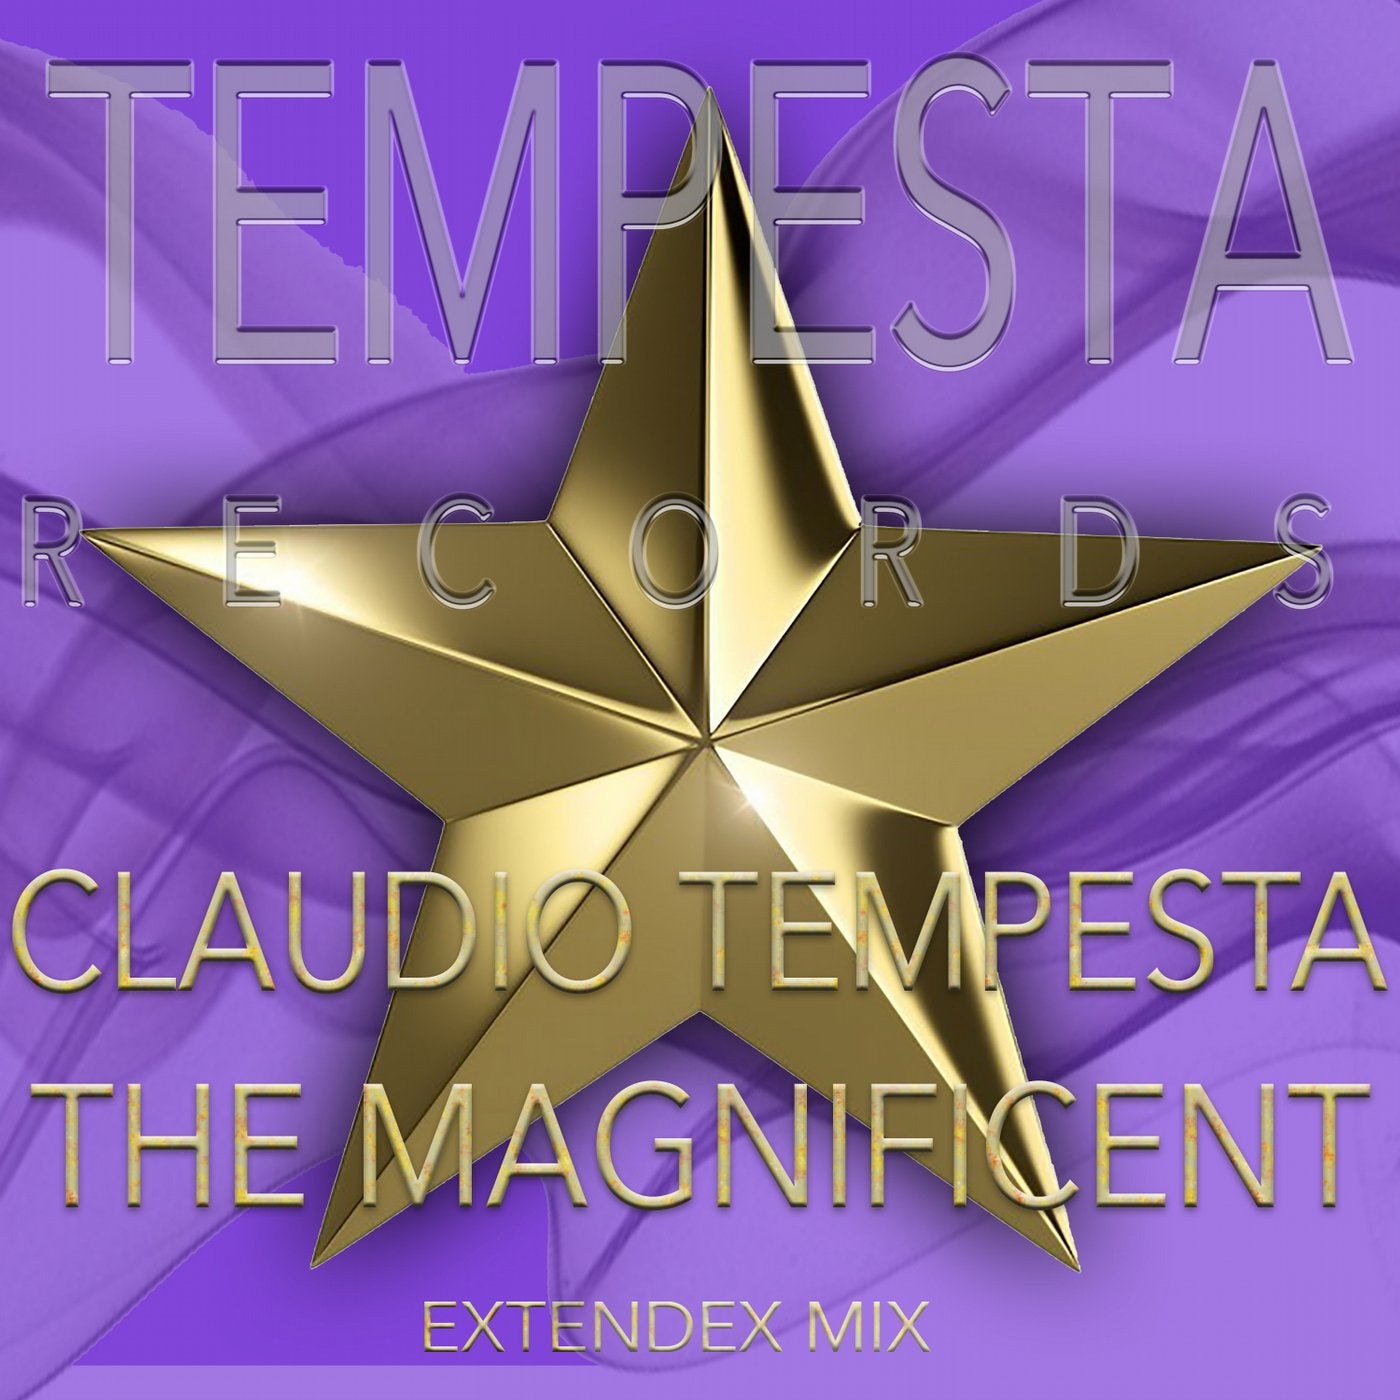 THE MAGNIFICENT (EXTENDED MIX)